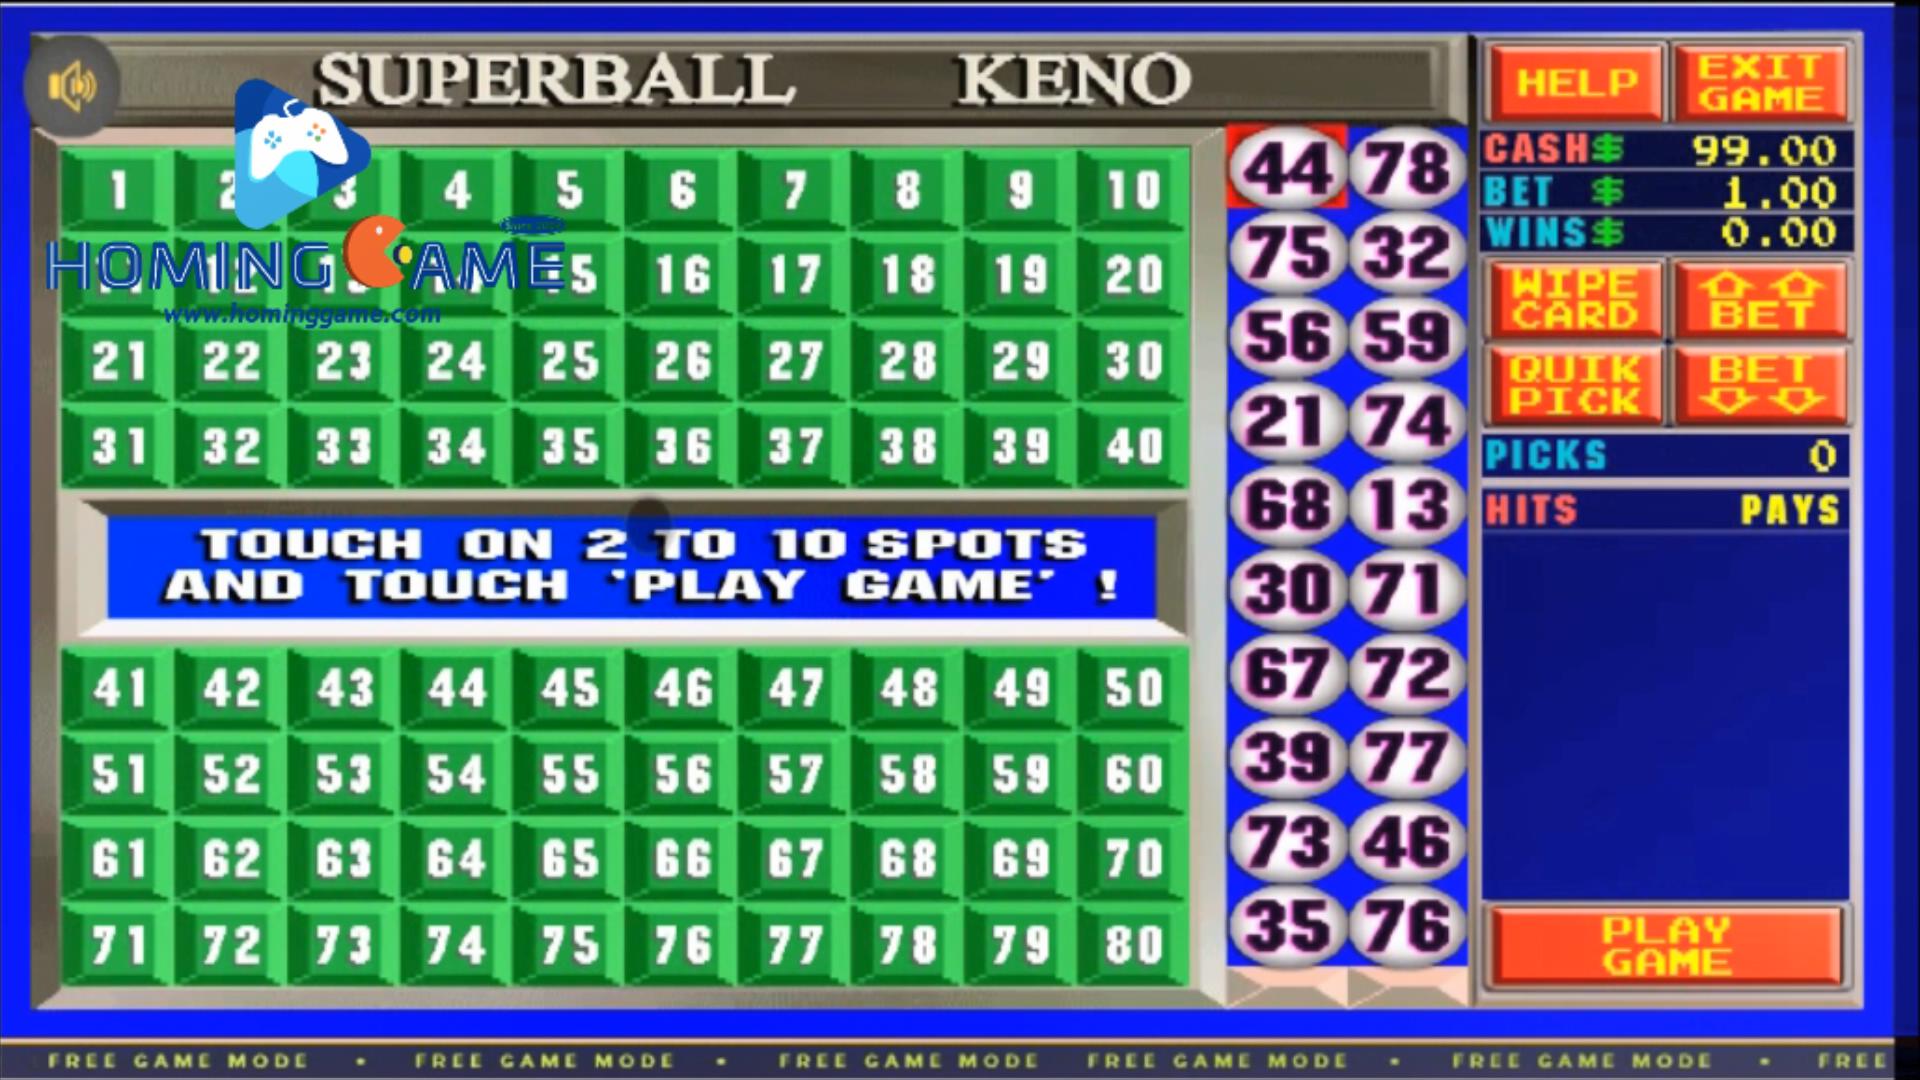 Classic Pot o' Gold Superball Keno Online Mobile Gaming Apps